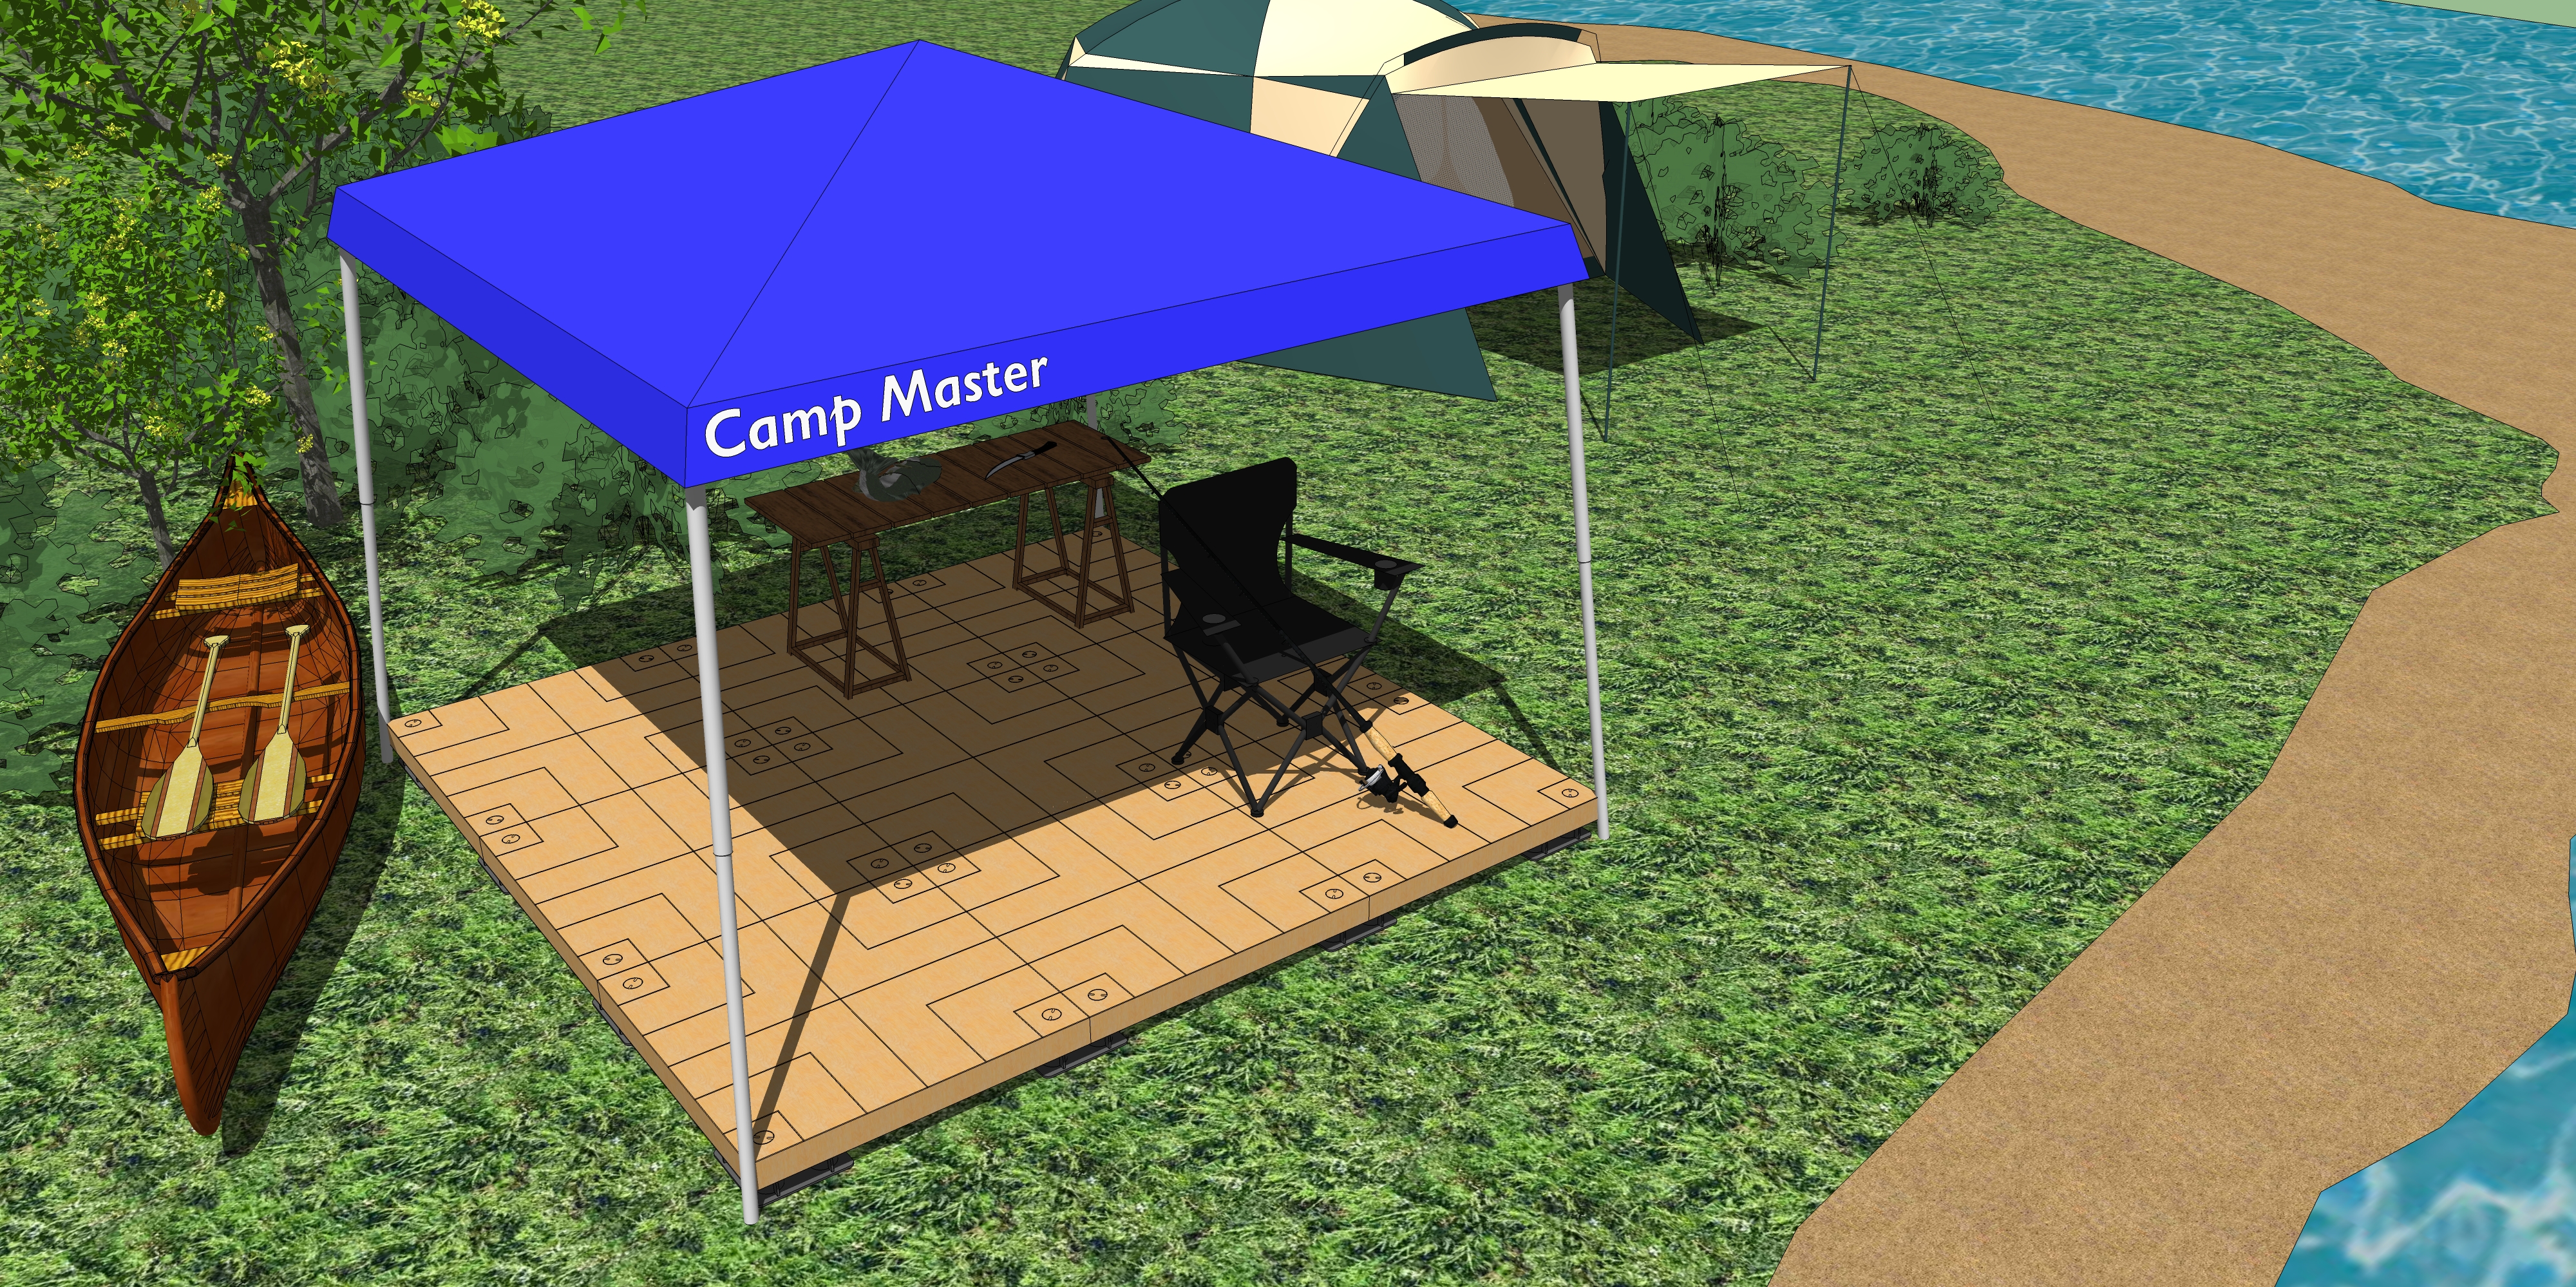 Temporary decks and platforms for outdoor activities and events